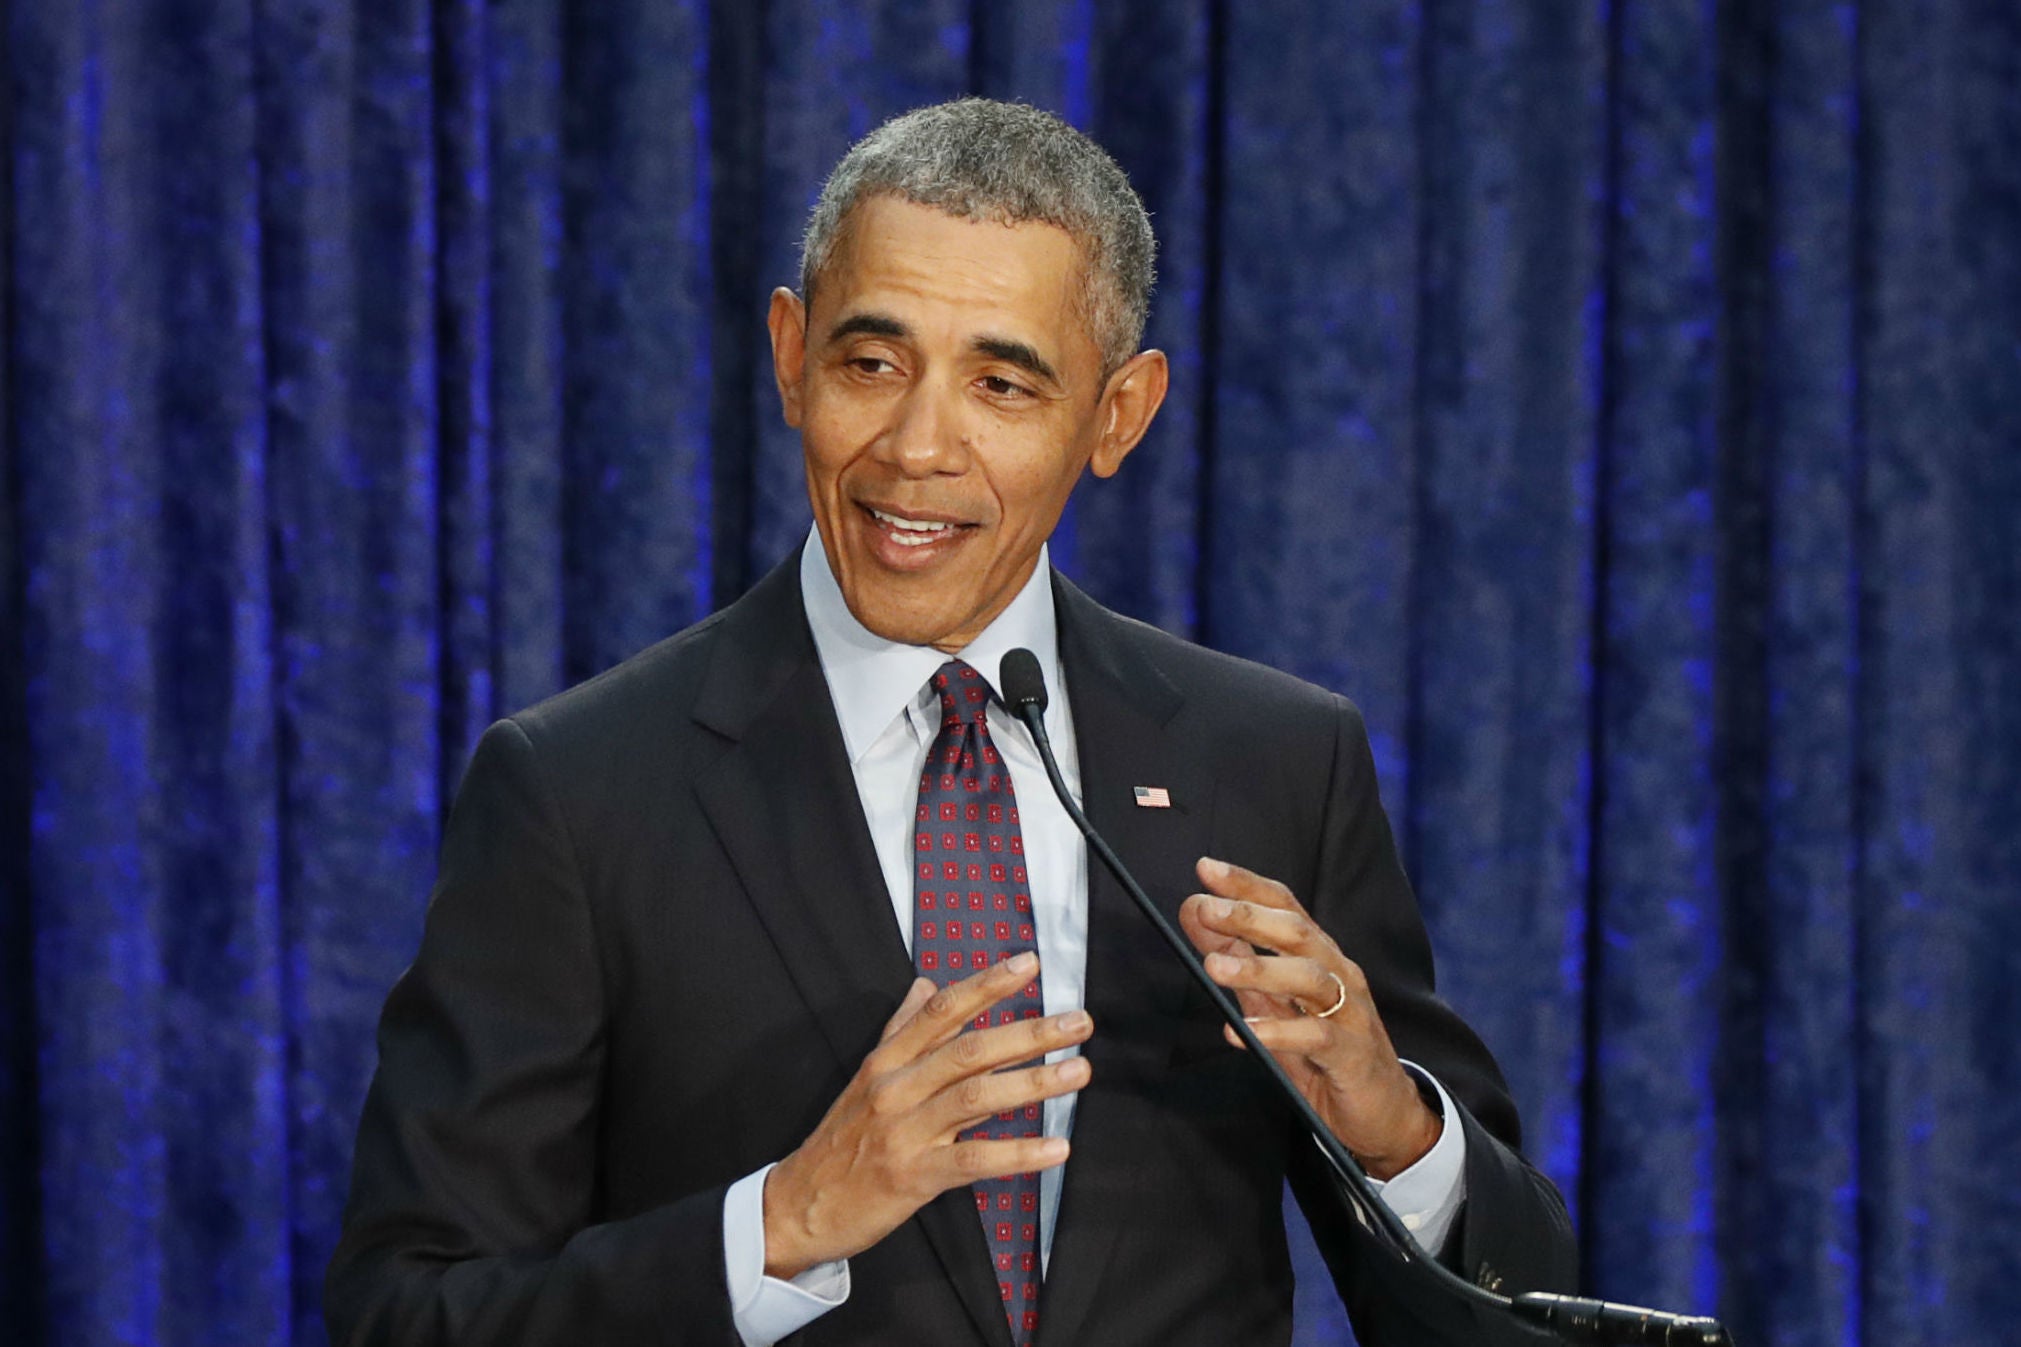 Barack Obama has been selected to give the annual Nelson Mandela Lecture in South Africa